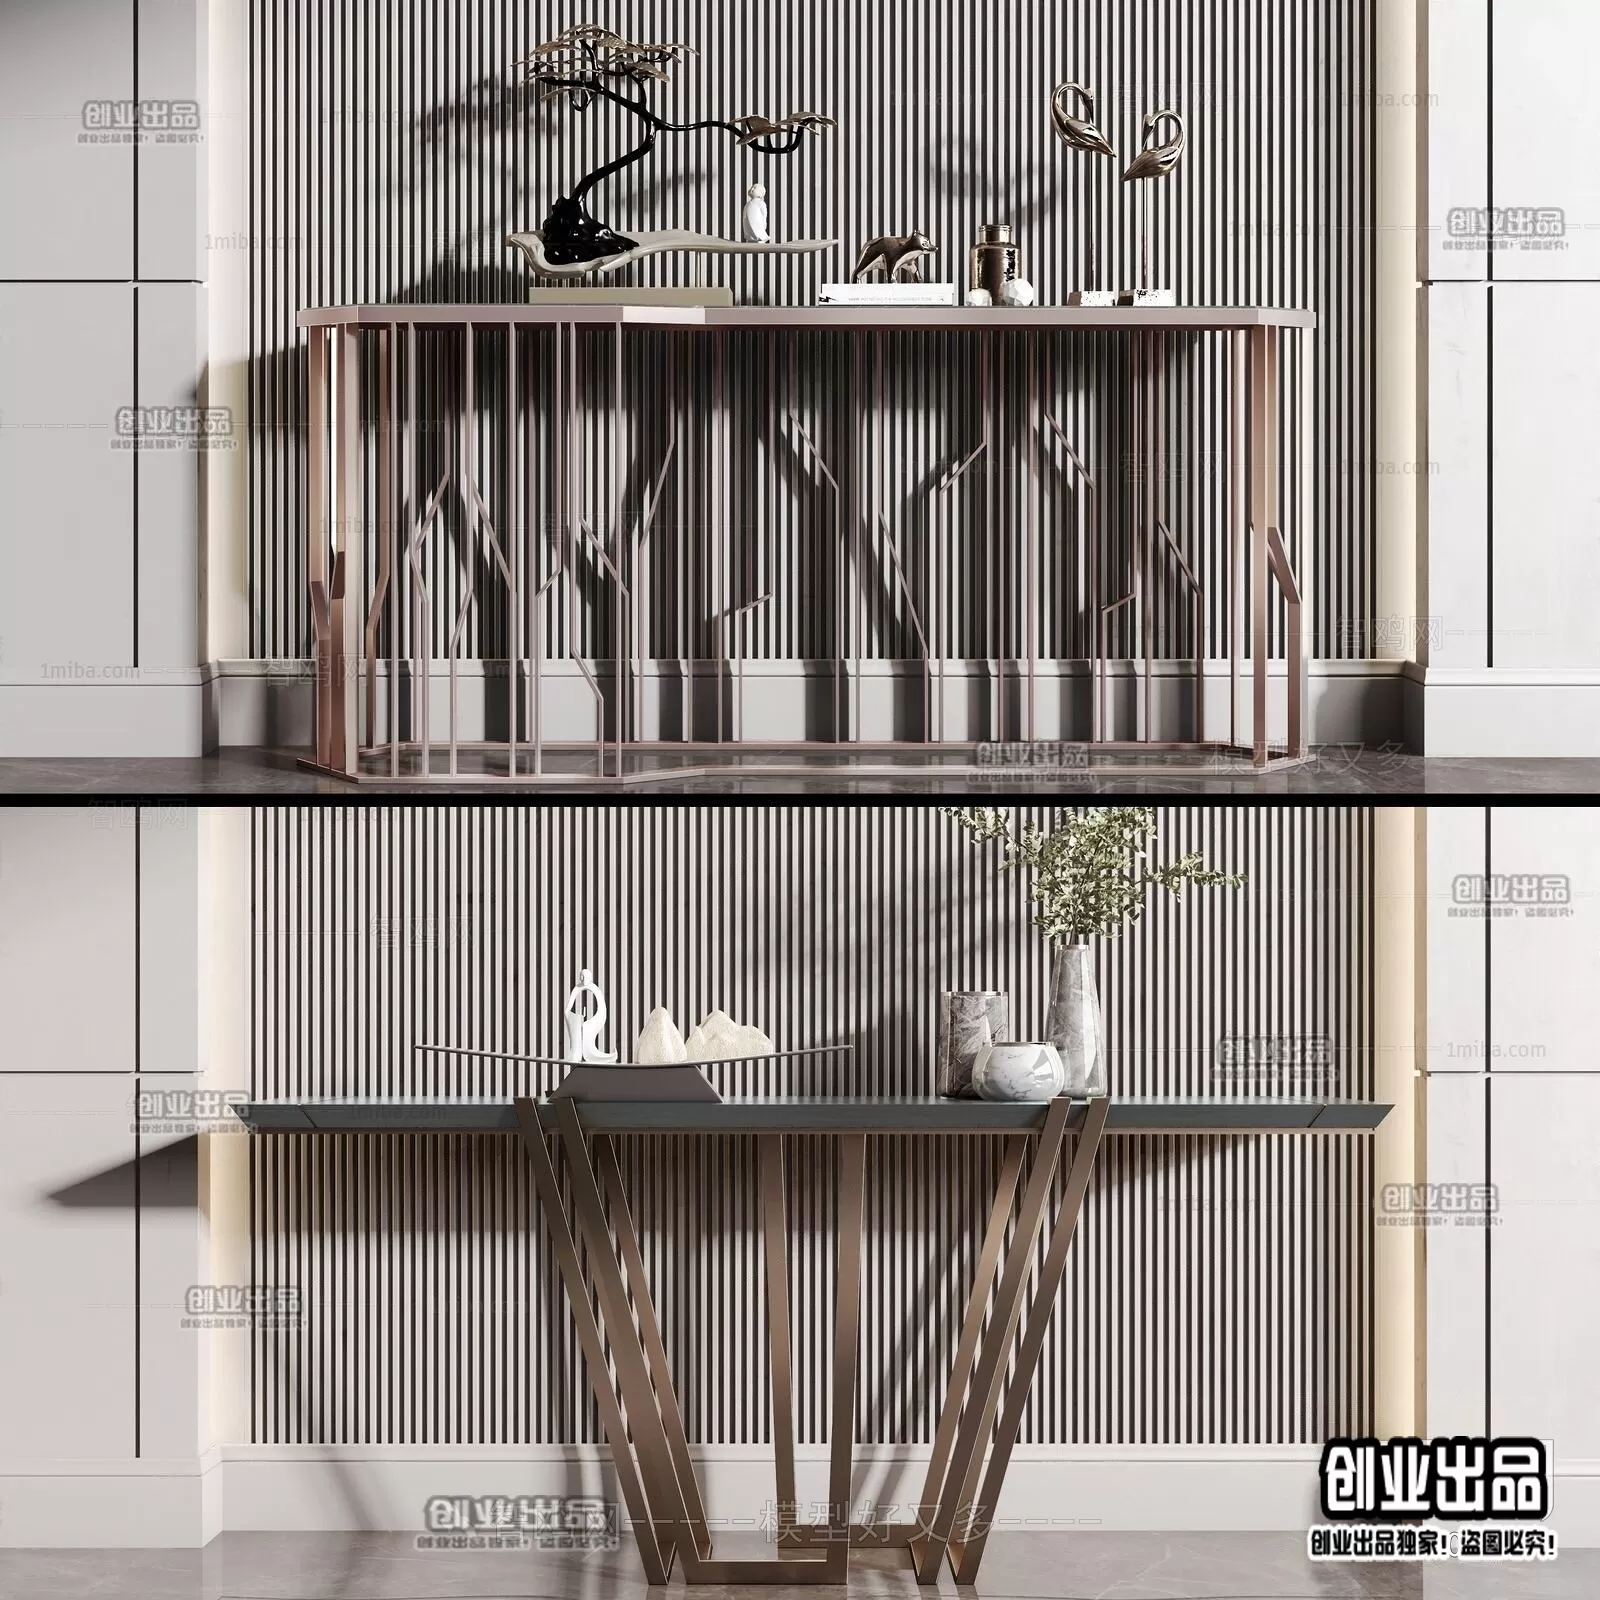 CONSOLE TABLE – 29 – FURNITURE 3D MODELS 2022 (VRAY)